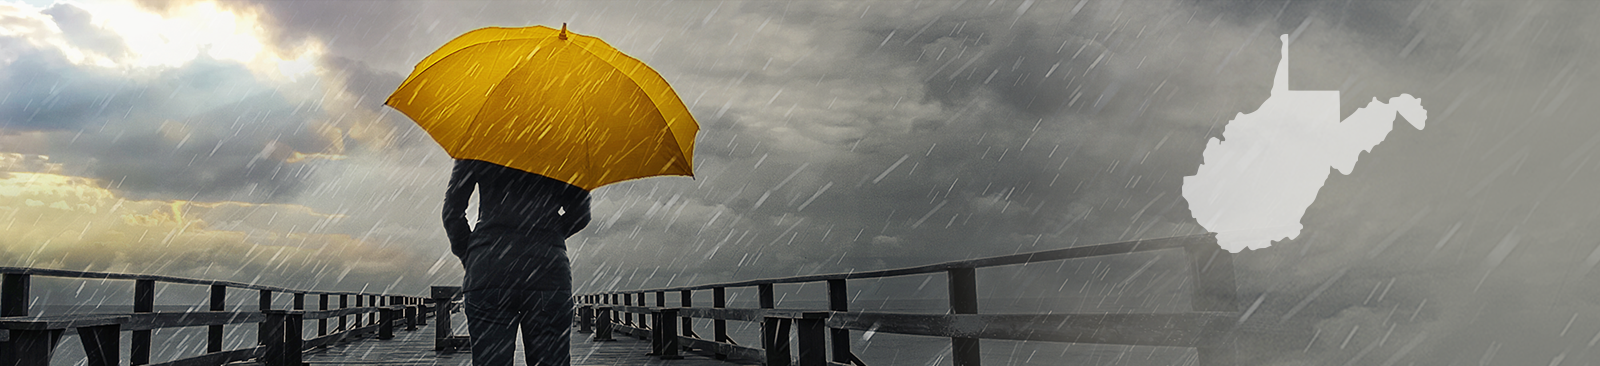 A person stands with their back to the camera, carrying a bright yellow umbrella in the middle of a storm. They stand on a pier, looking out at the stormy sky, which simultaneously looks threatening and hopeful as some of the clouds part to reveal a glimpse of sunshine.